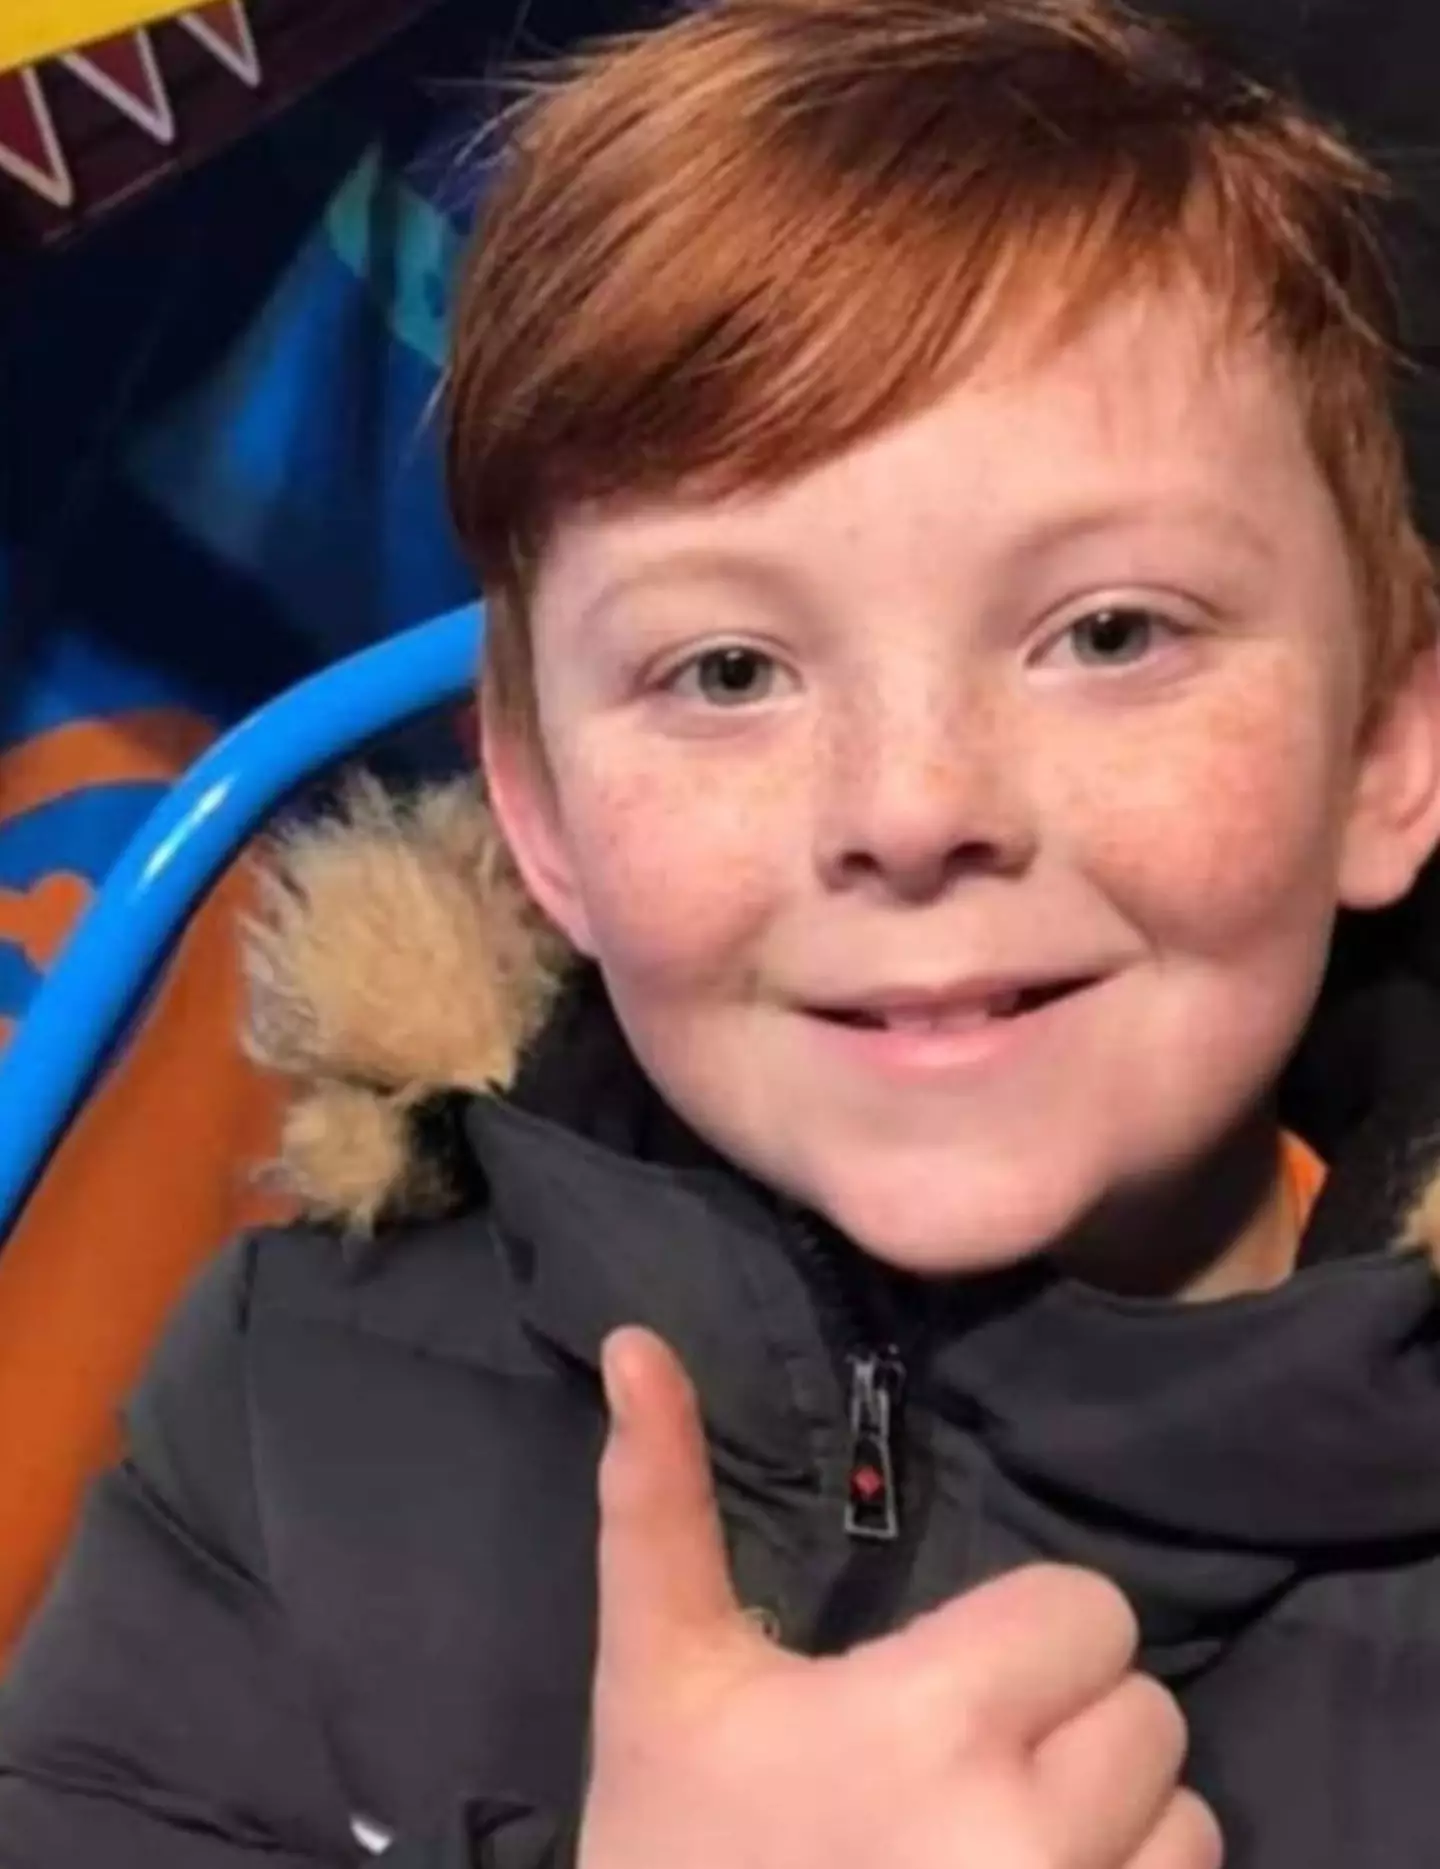 11-year-old Tommie-Lee died after taking part in a 'chroming' challenge.